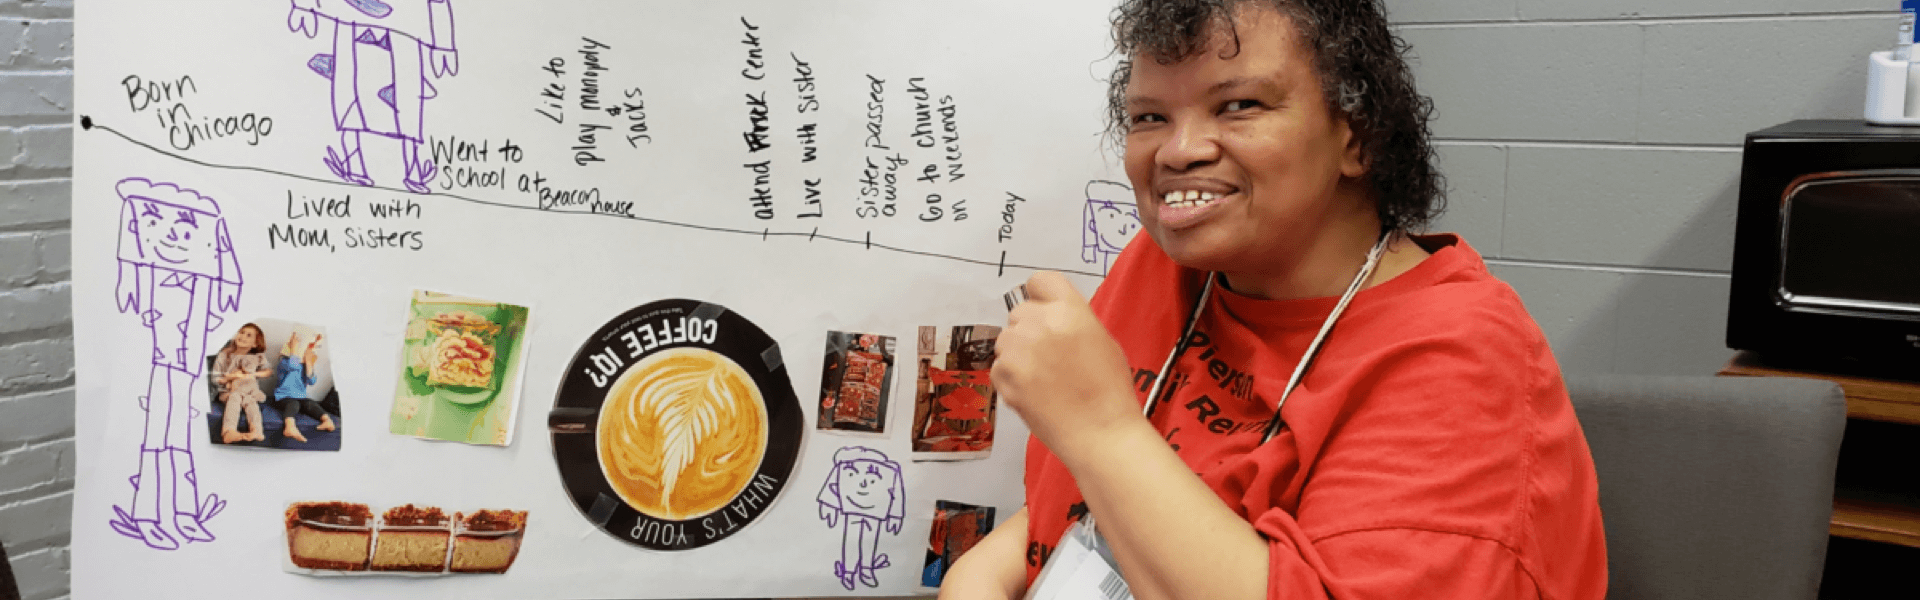 Woman of color sitting in front of a timeline, wearing a red t-shirt and smiling